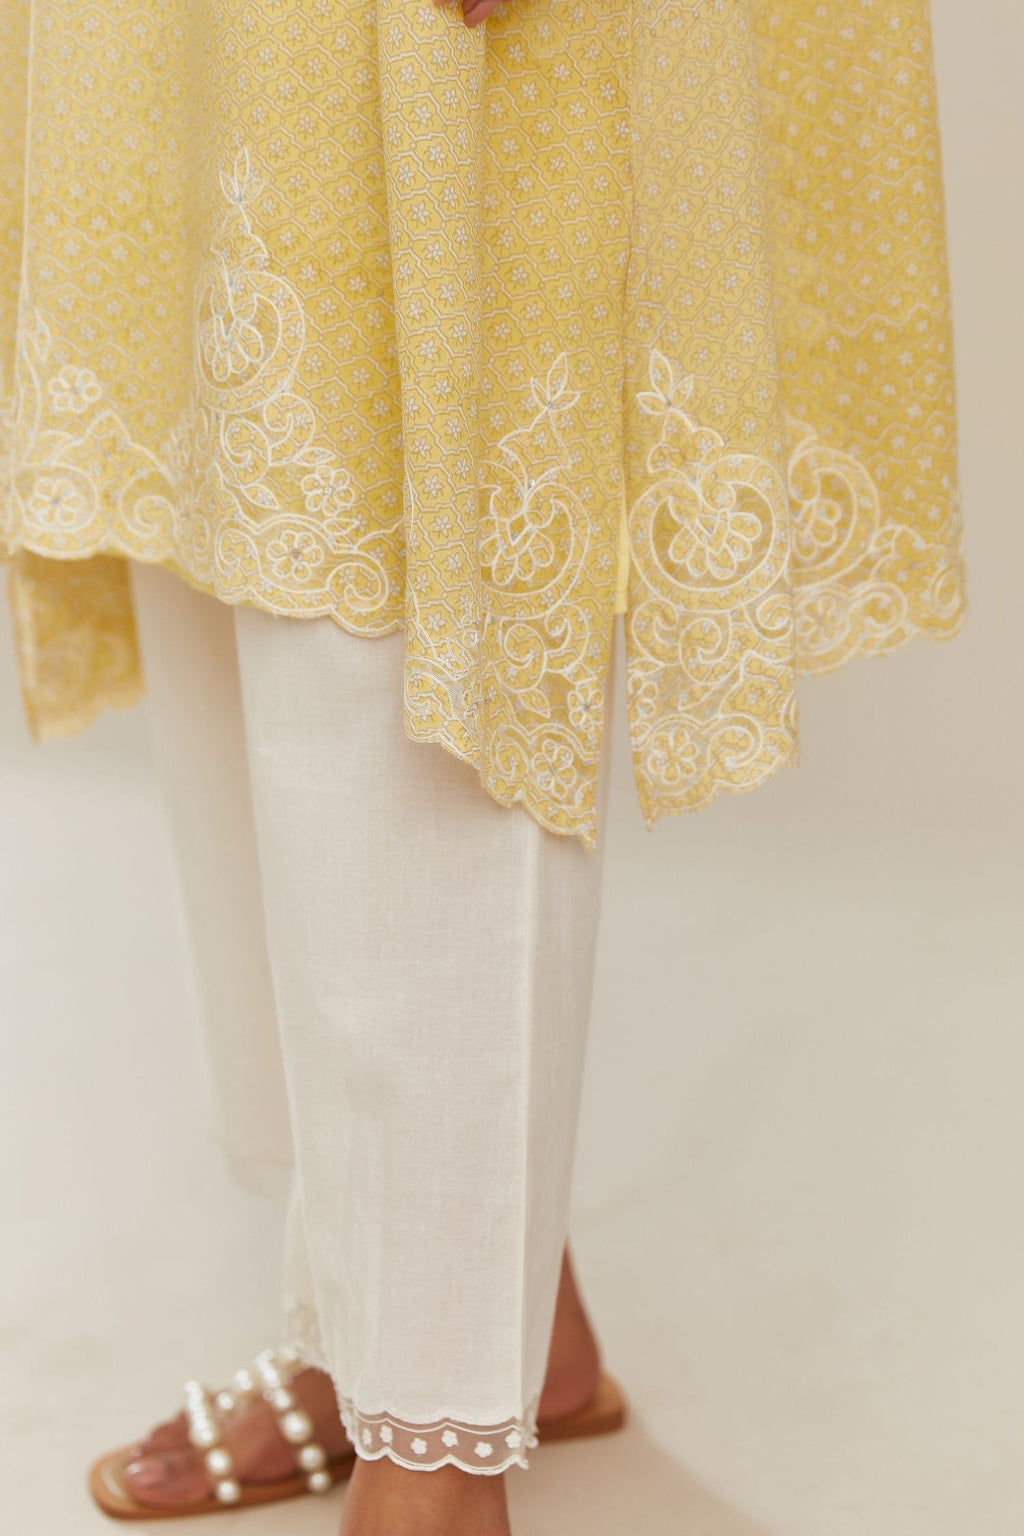 A-line hand block over-printed yellow kurta set with bell sleeves and cutwork embroidery with sequins.